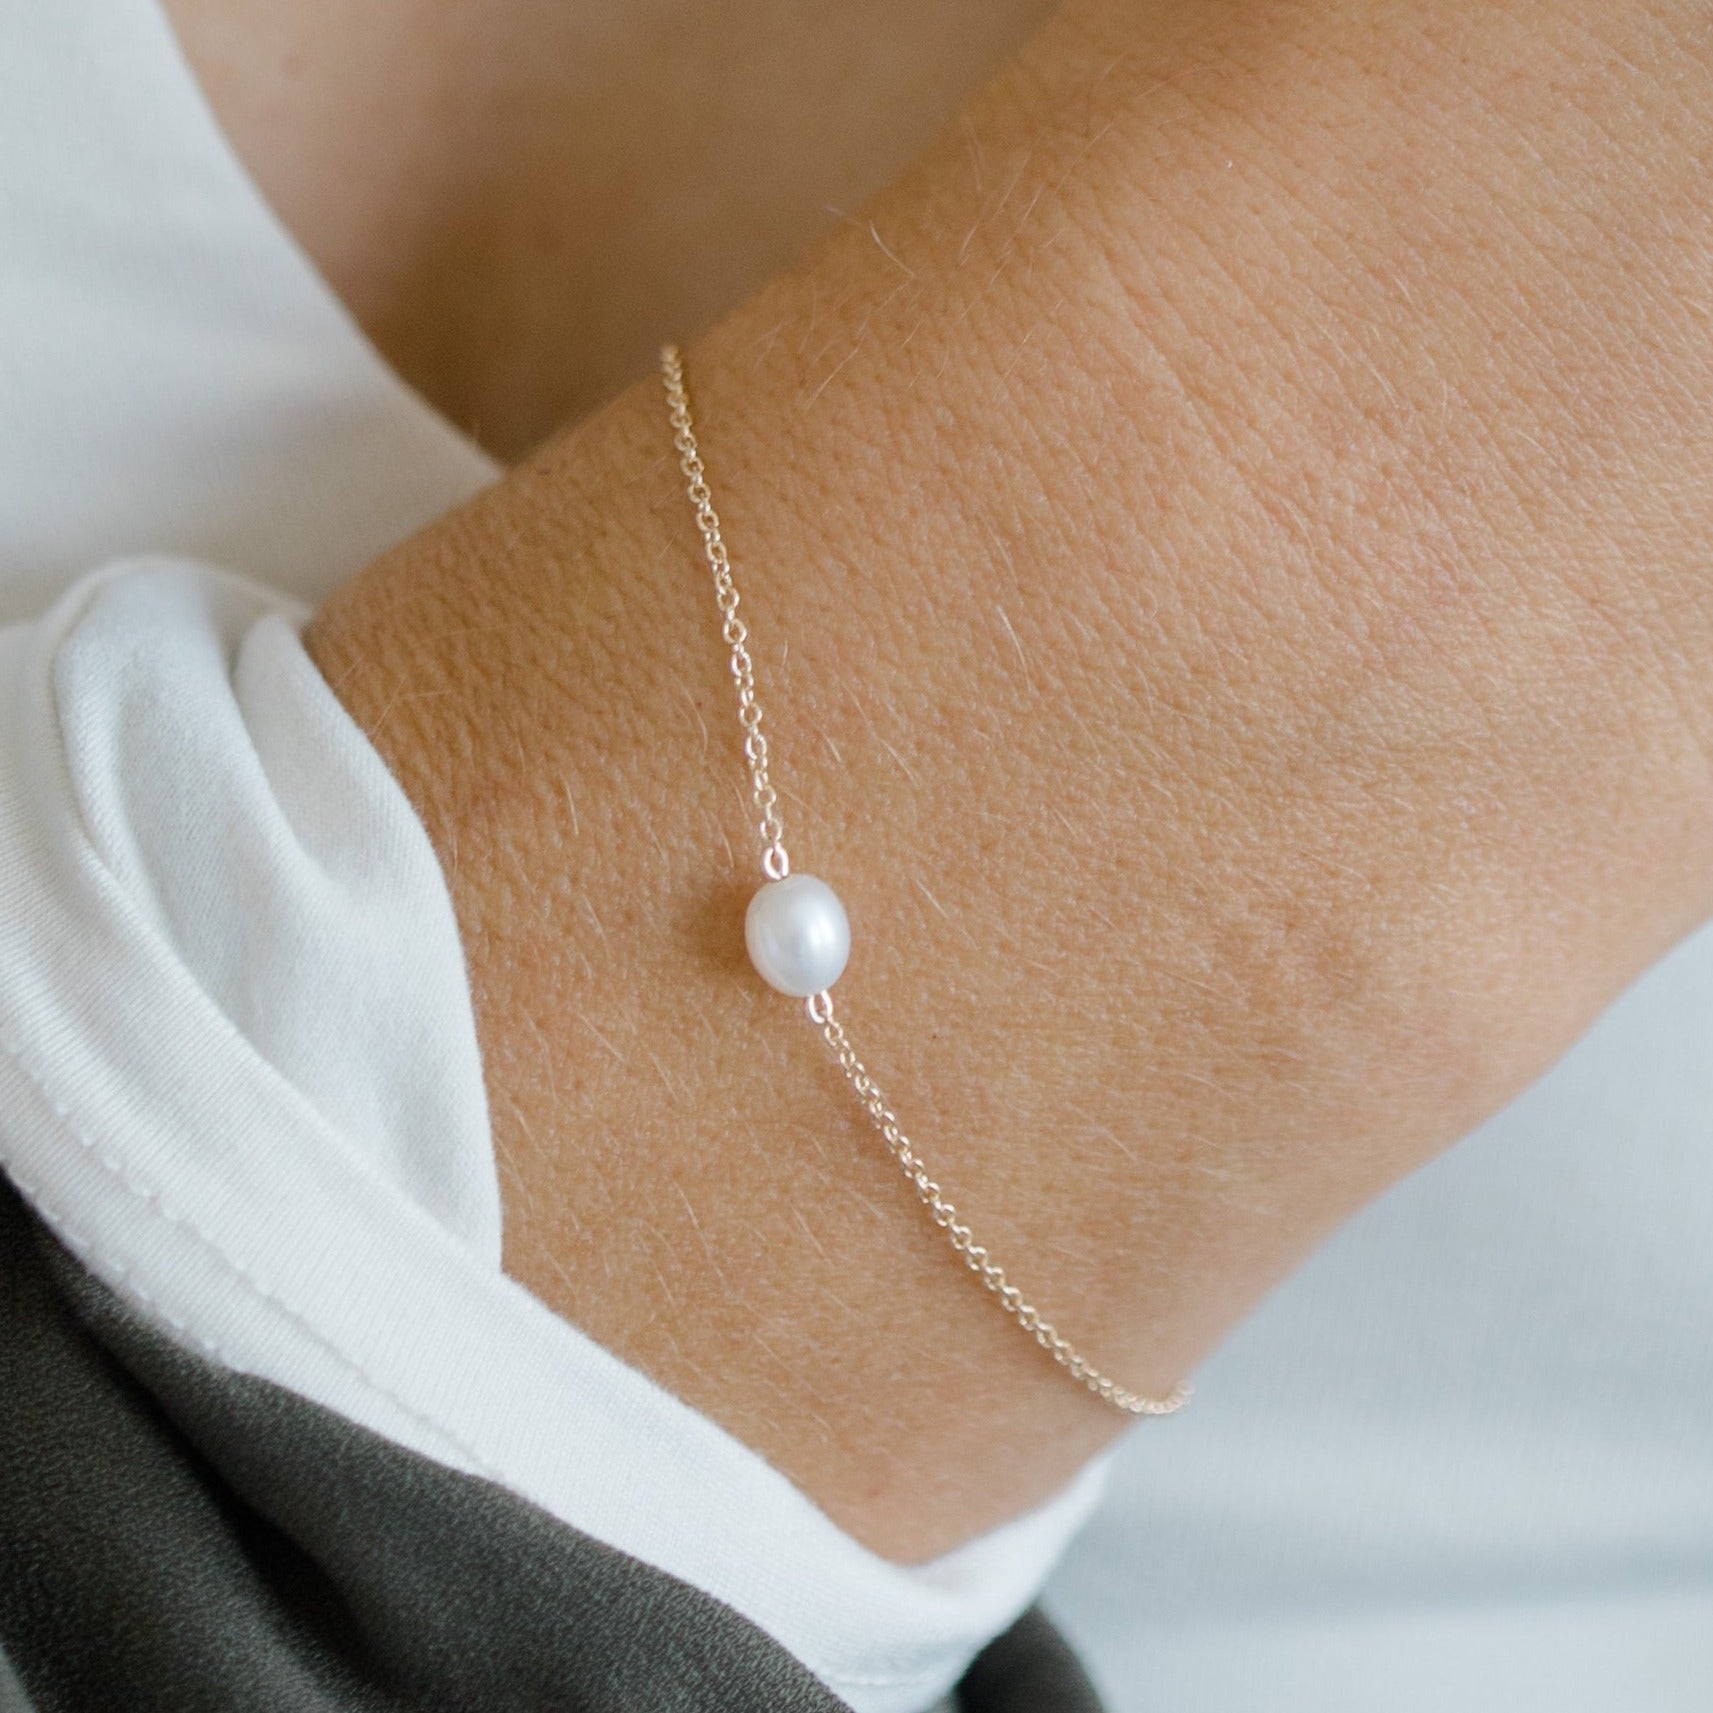 White freshwater pearl bracelet. A simple pearl floats along a 14k yellow gold chain.